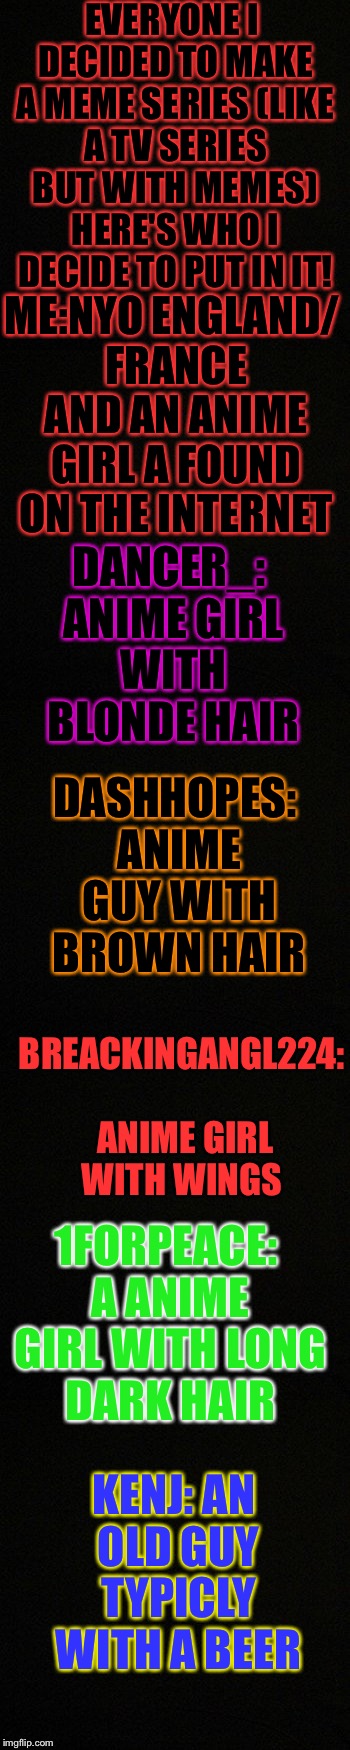 There are more like jbmemegeek but they'll have there names pointed out I hope you all like them | EVERYONE I DECIDED TO MAKE A MEME SERIES (LIKE A TV SERIES BUT WITH MEMES) HERE'S WHO I DECIDE TO PUT IN IT! ME:NYO ENGLAND/ FRANCE AND AN ANIME GIRL A FOUND ON THE INTERNET; DANCER_: ANIME GIRL WITH BLONDE HAIR; DASHHOPES: ANIME GUY WITH BROWN HAIR; BREACKINGANGL224: ANIME GIRL WITH WINGS; 1FORPEACE: A ANIME GIRL WITH LONG DARK HAIR; KENJ: AN OLD GUY TYPICLY WITH A BEER | image tagged in memes,meme,tv show,meme stream,series | made w/ Imgflip meme maker